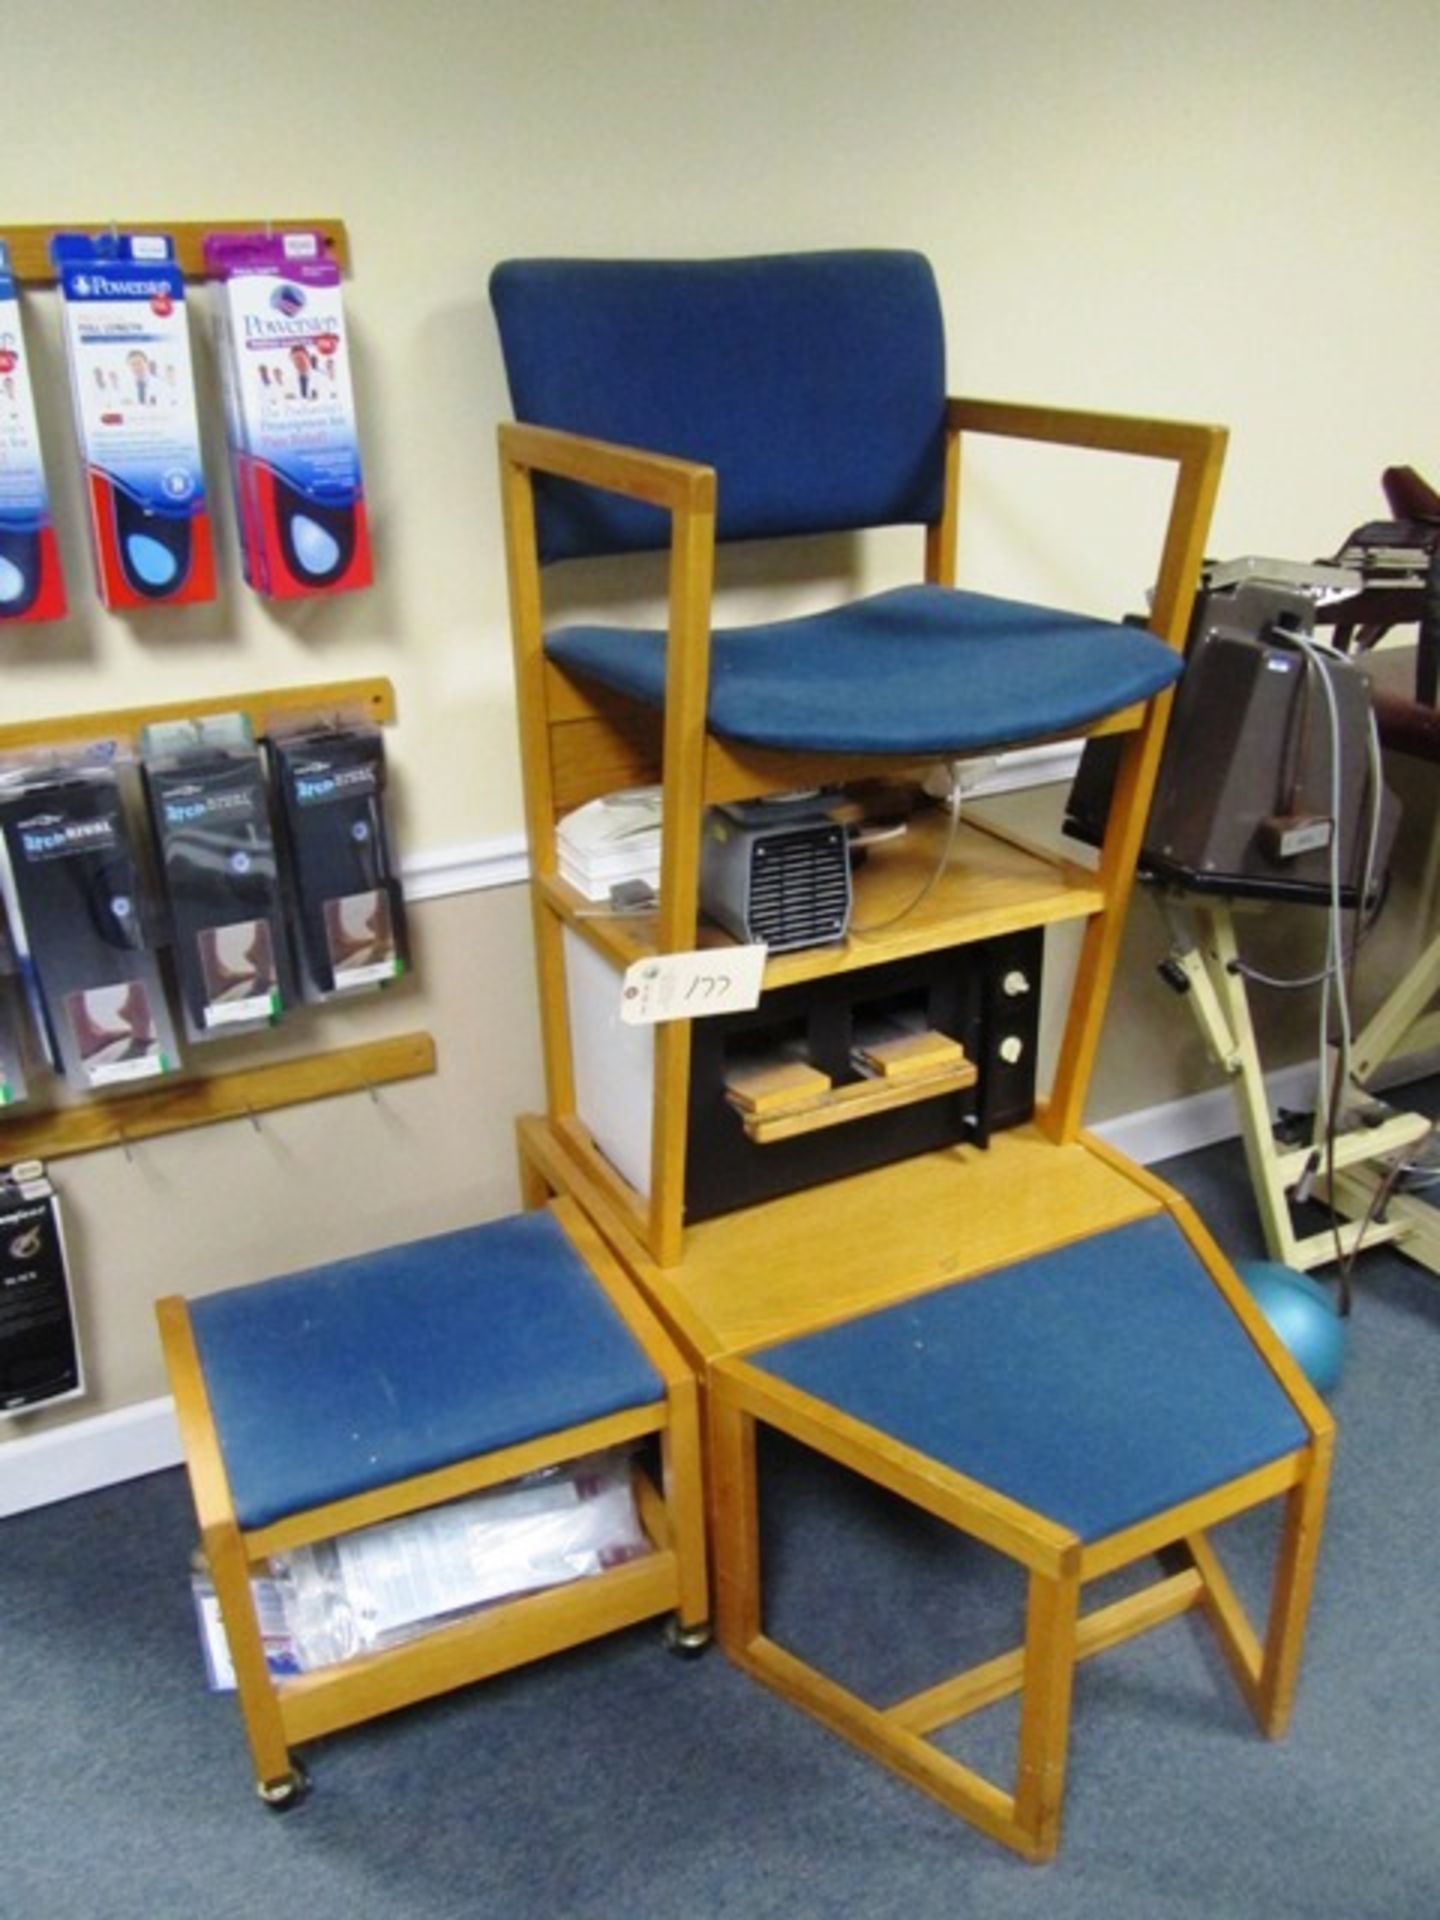 Custom Orthotic Chair (for making orthotic inserts)*located Oak Lawn, IL